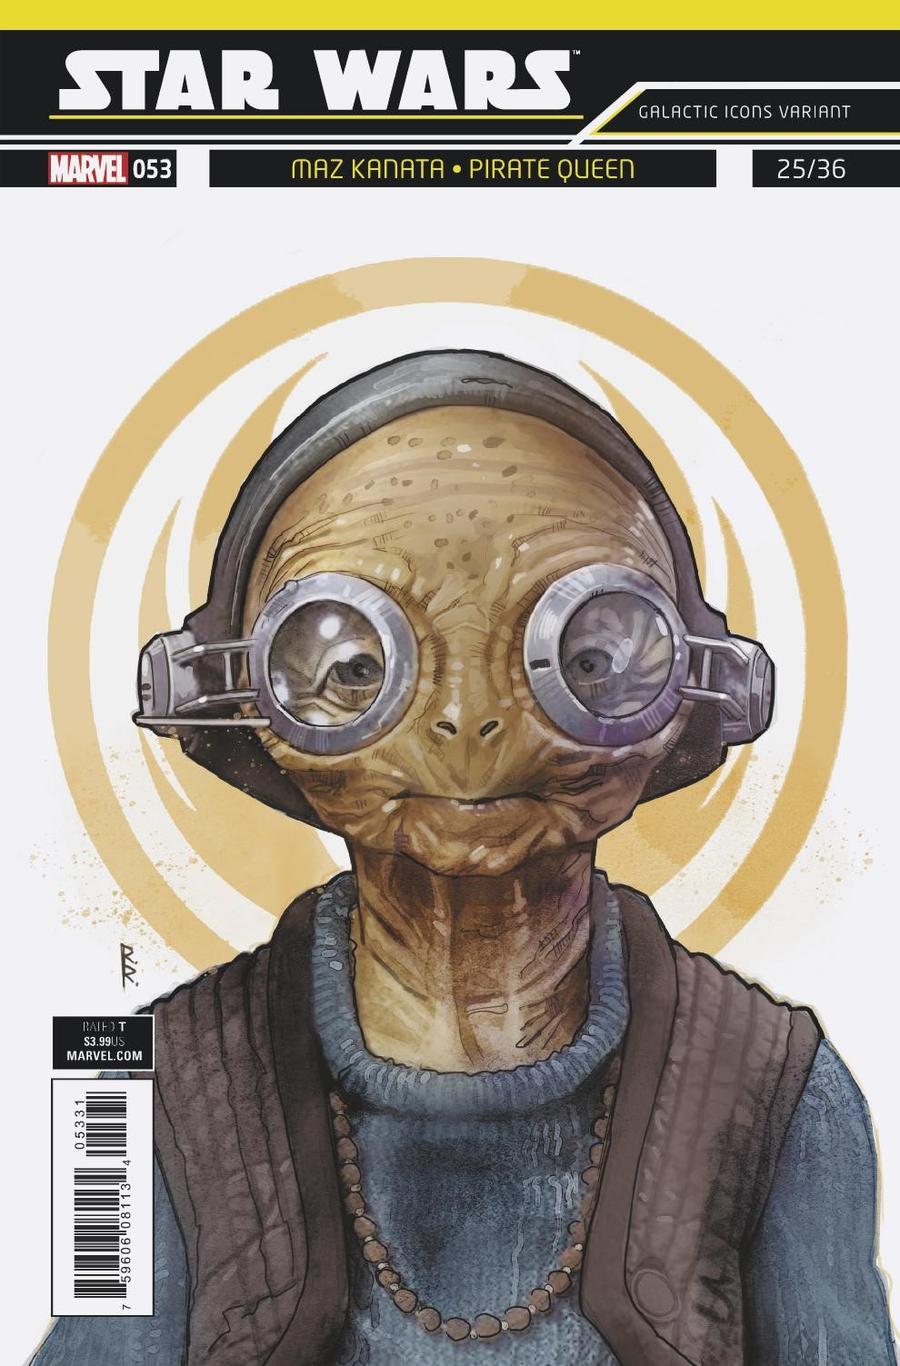 Star Wars Vol 4 #53 Cover C Variant Rod Reis Galactic Icon Cover